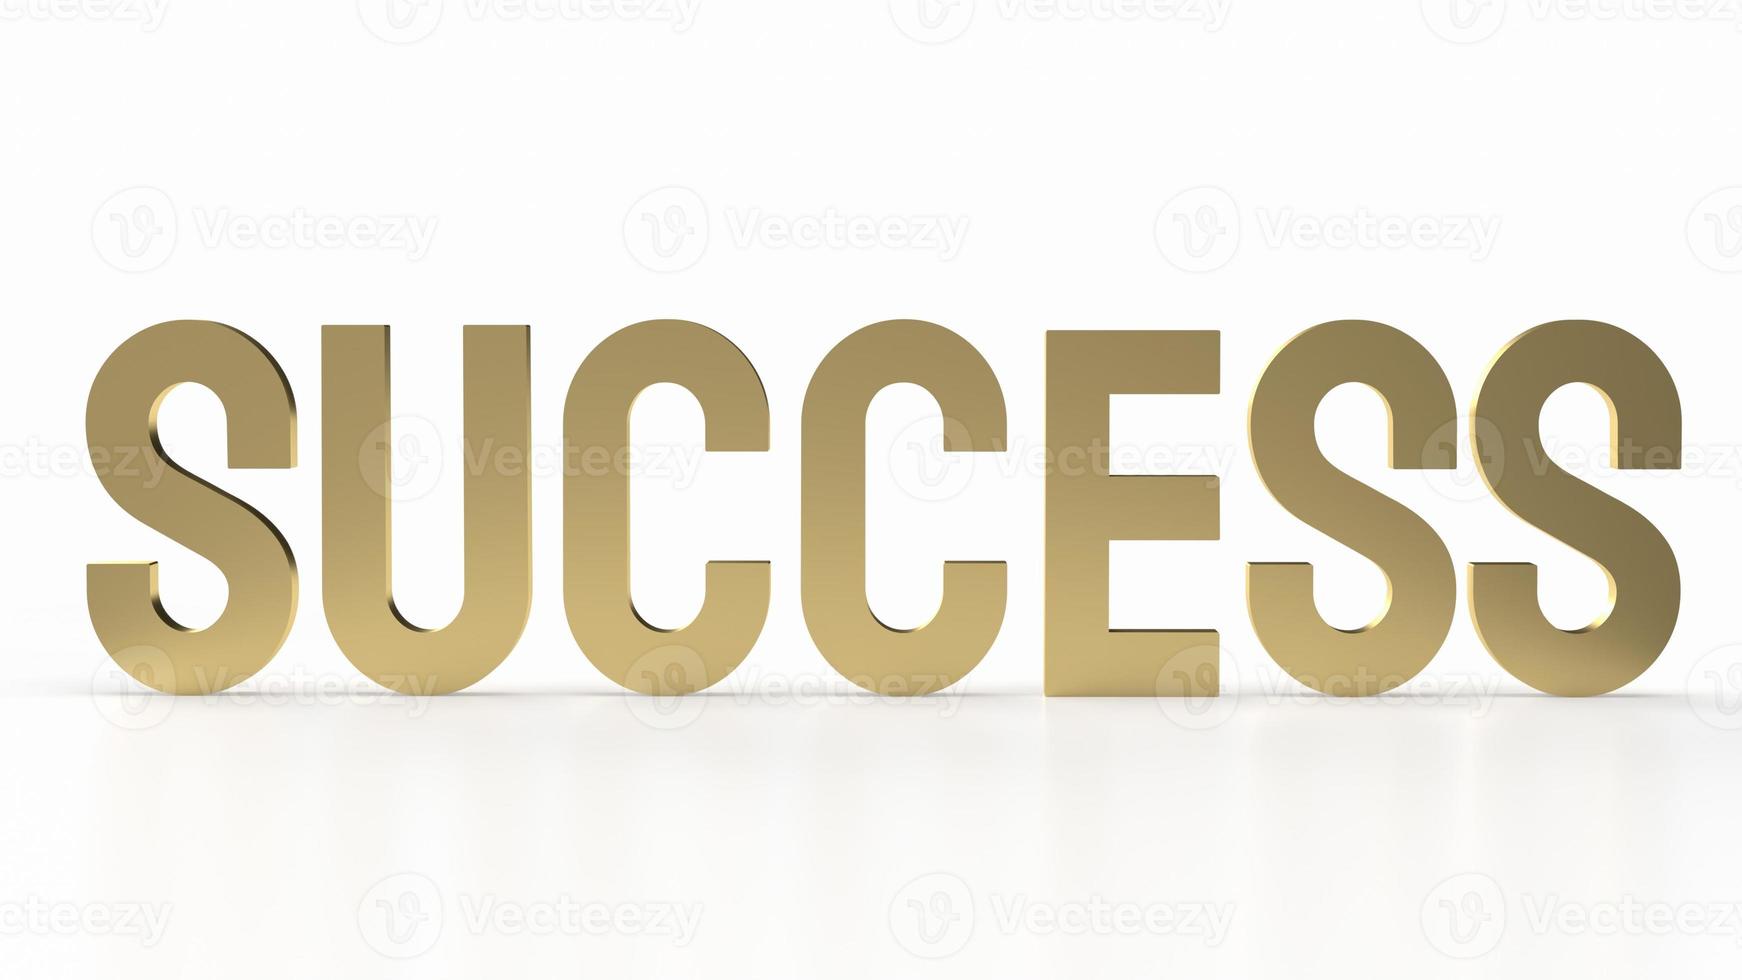 The success gold text for business content background 3d rendering photo